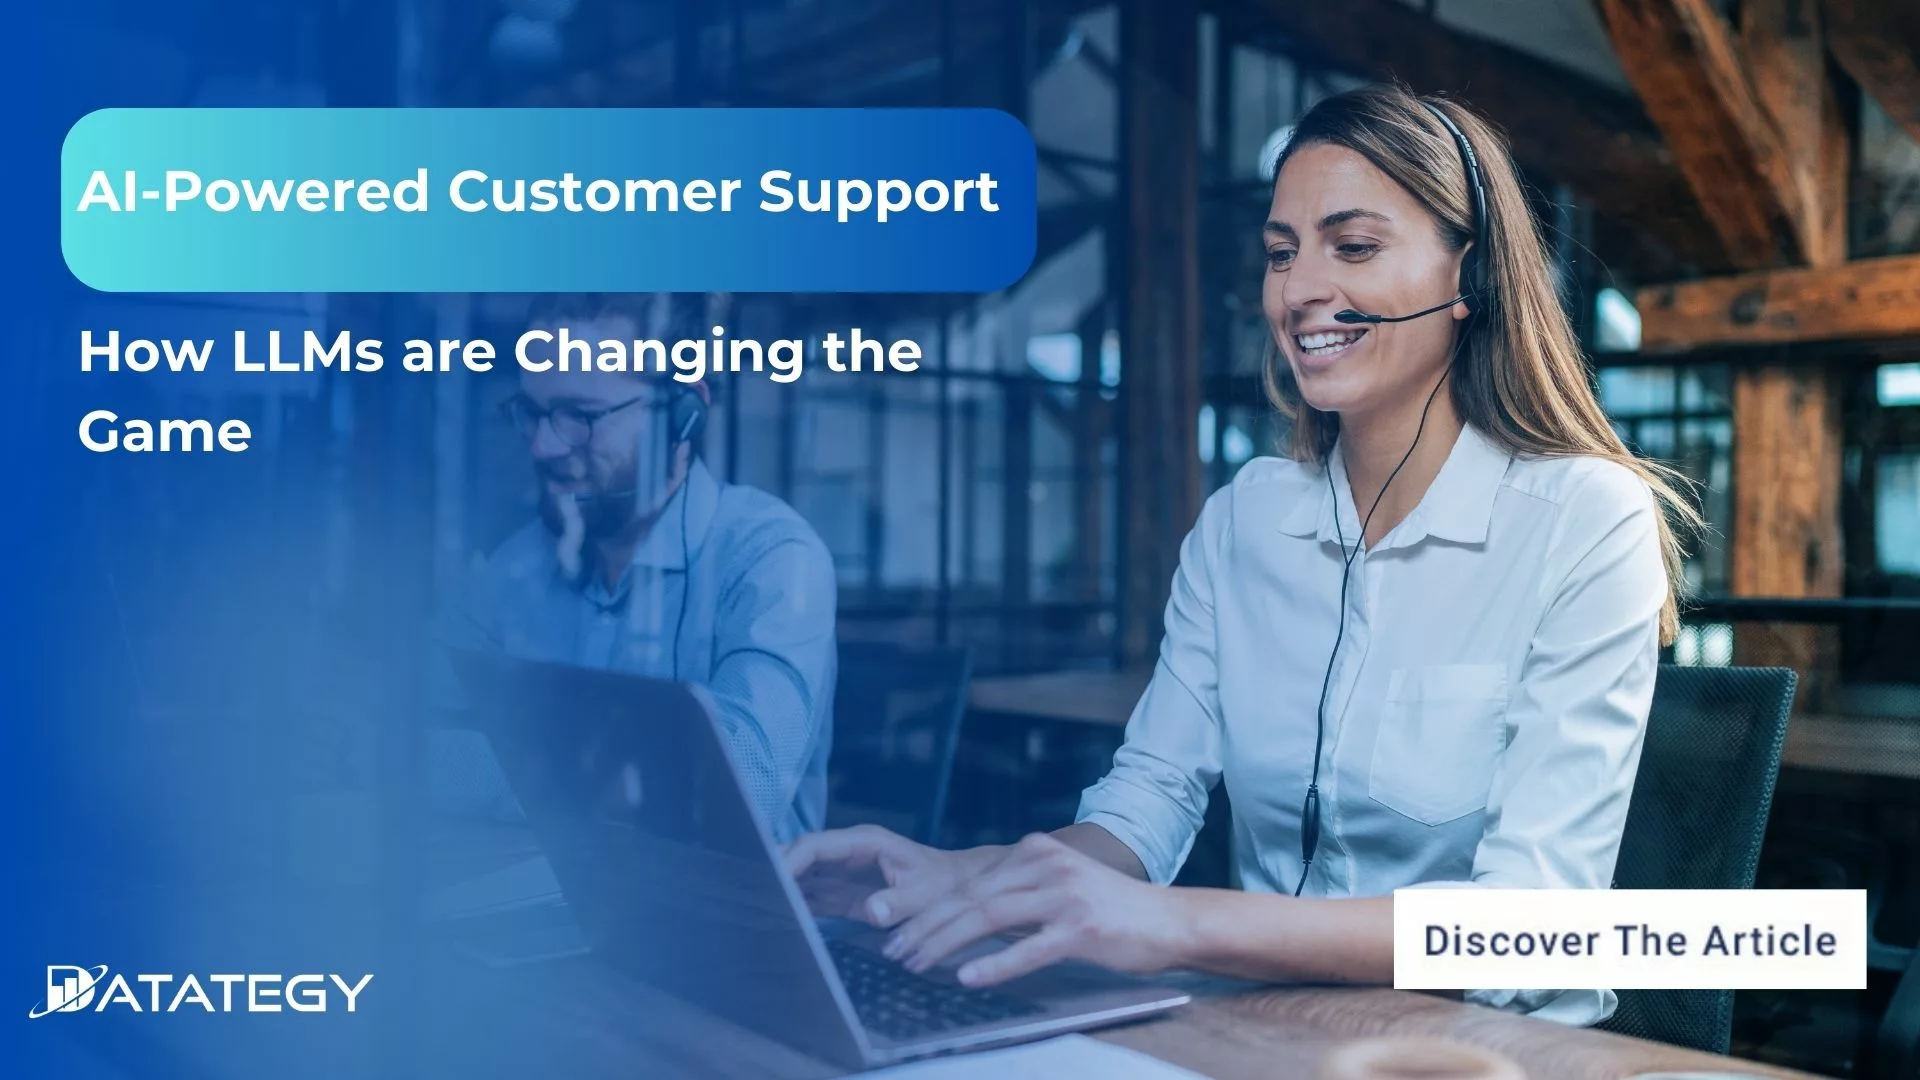 AI-Powered Customer Support: How LLMs are Changing the Game